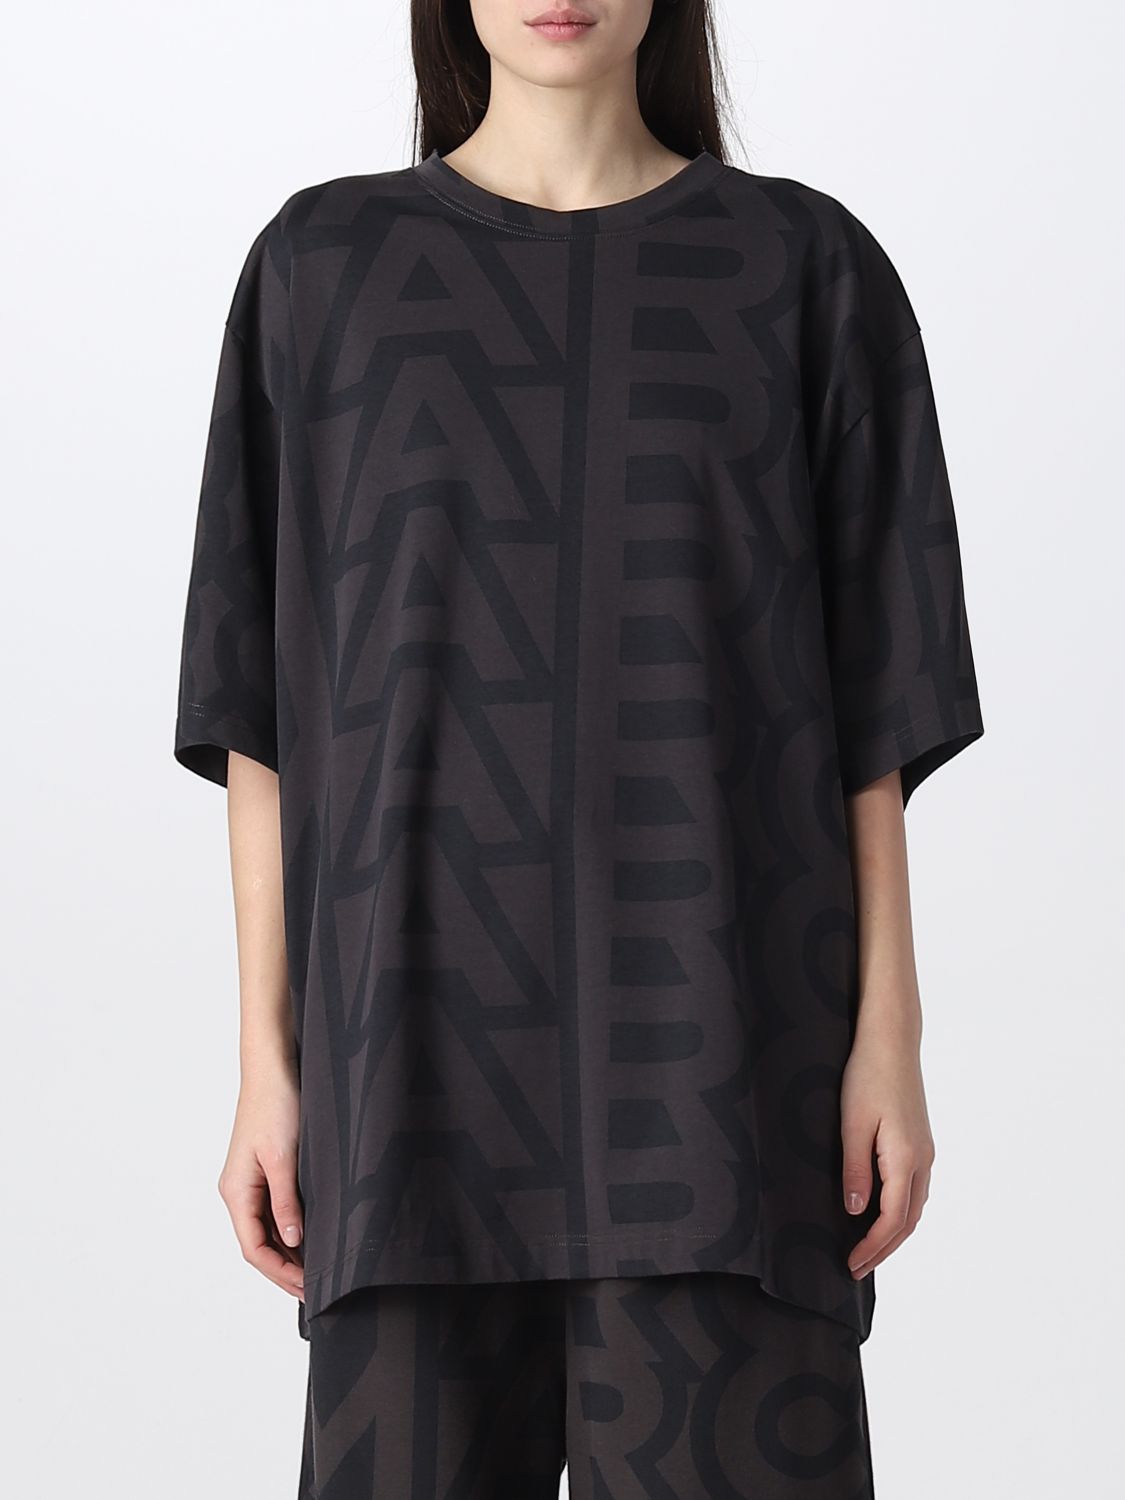 T-shirt Marc Jacobs: T-shirt Marc Jacobs in cotone con logo all over nero 1